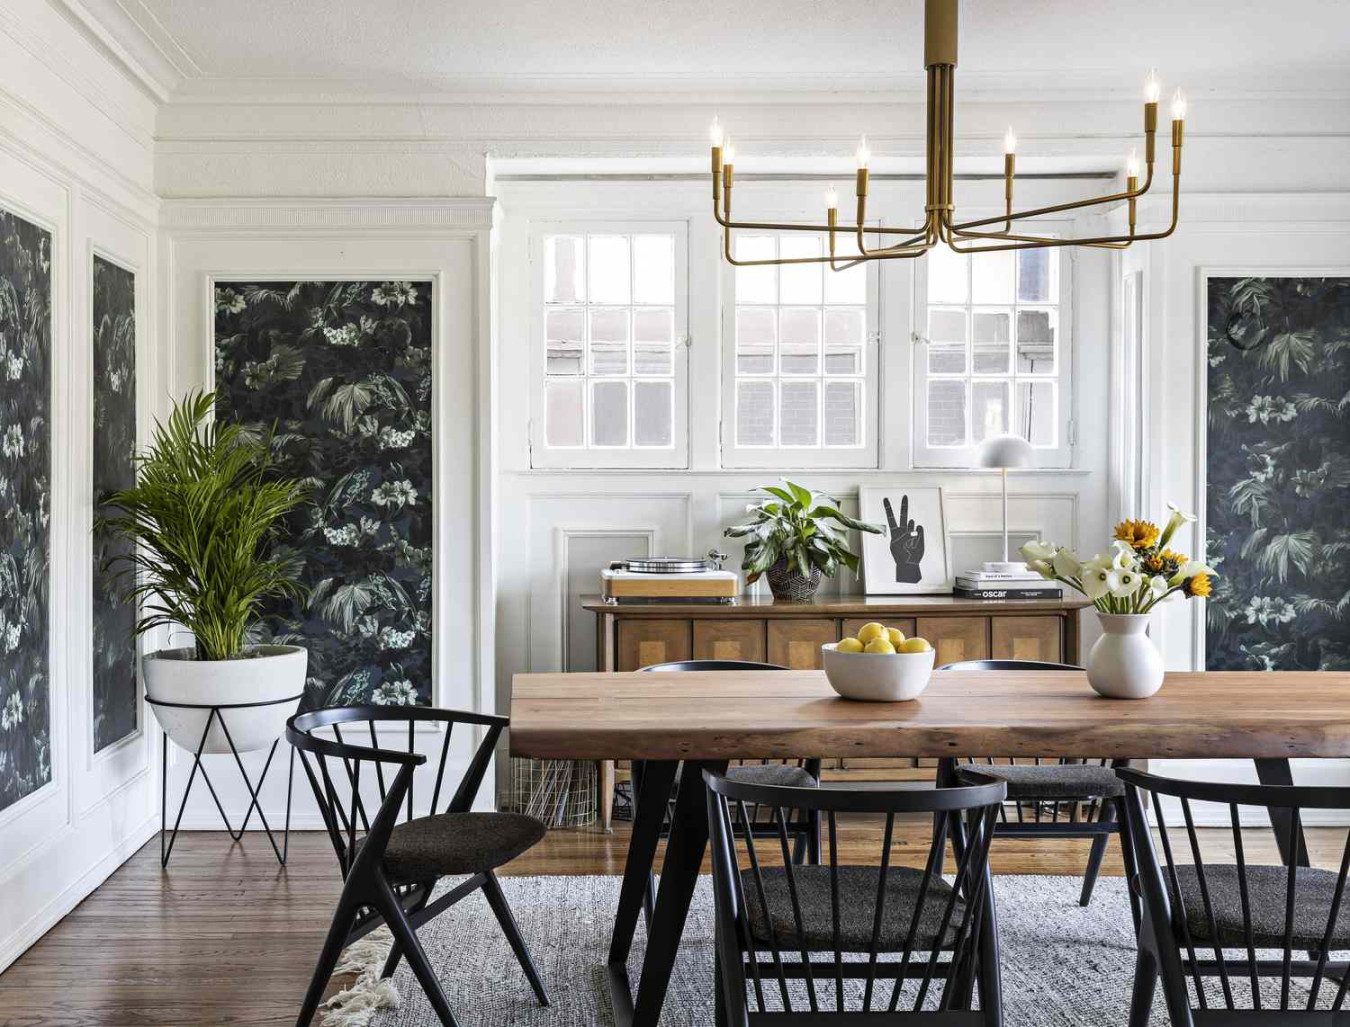 Dining Room Decor Ideas For a Stylish Entertaining Space